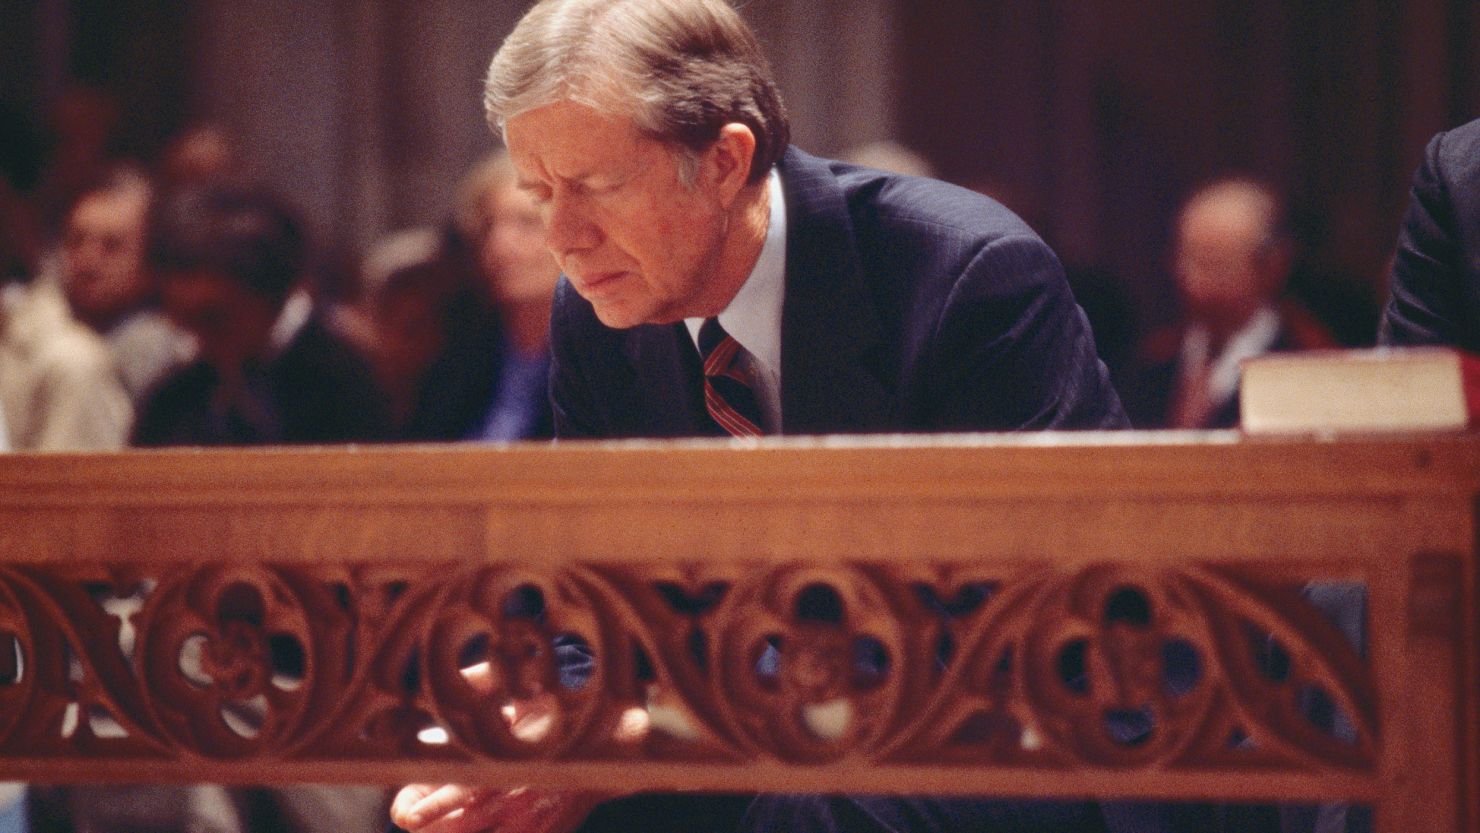 President Jimmy Carter bows during a prayer service for the hostages being held in Iran on November 15, 1979, at the National Cathedral in Washington.